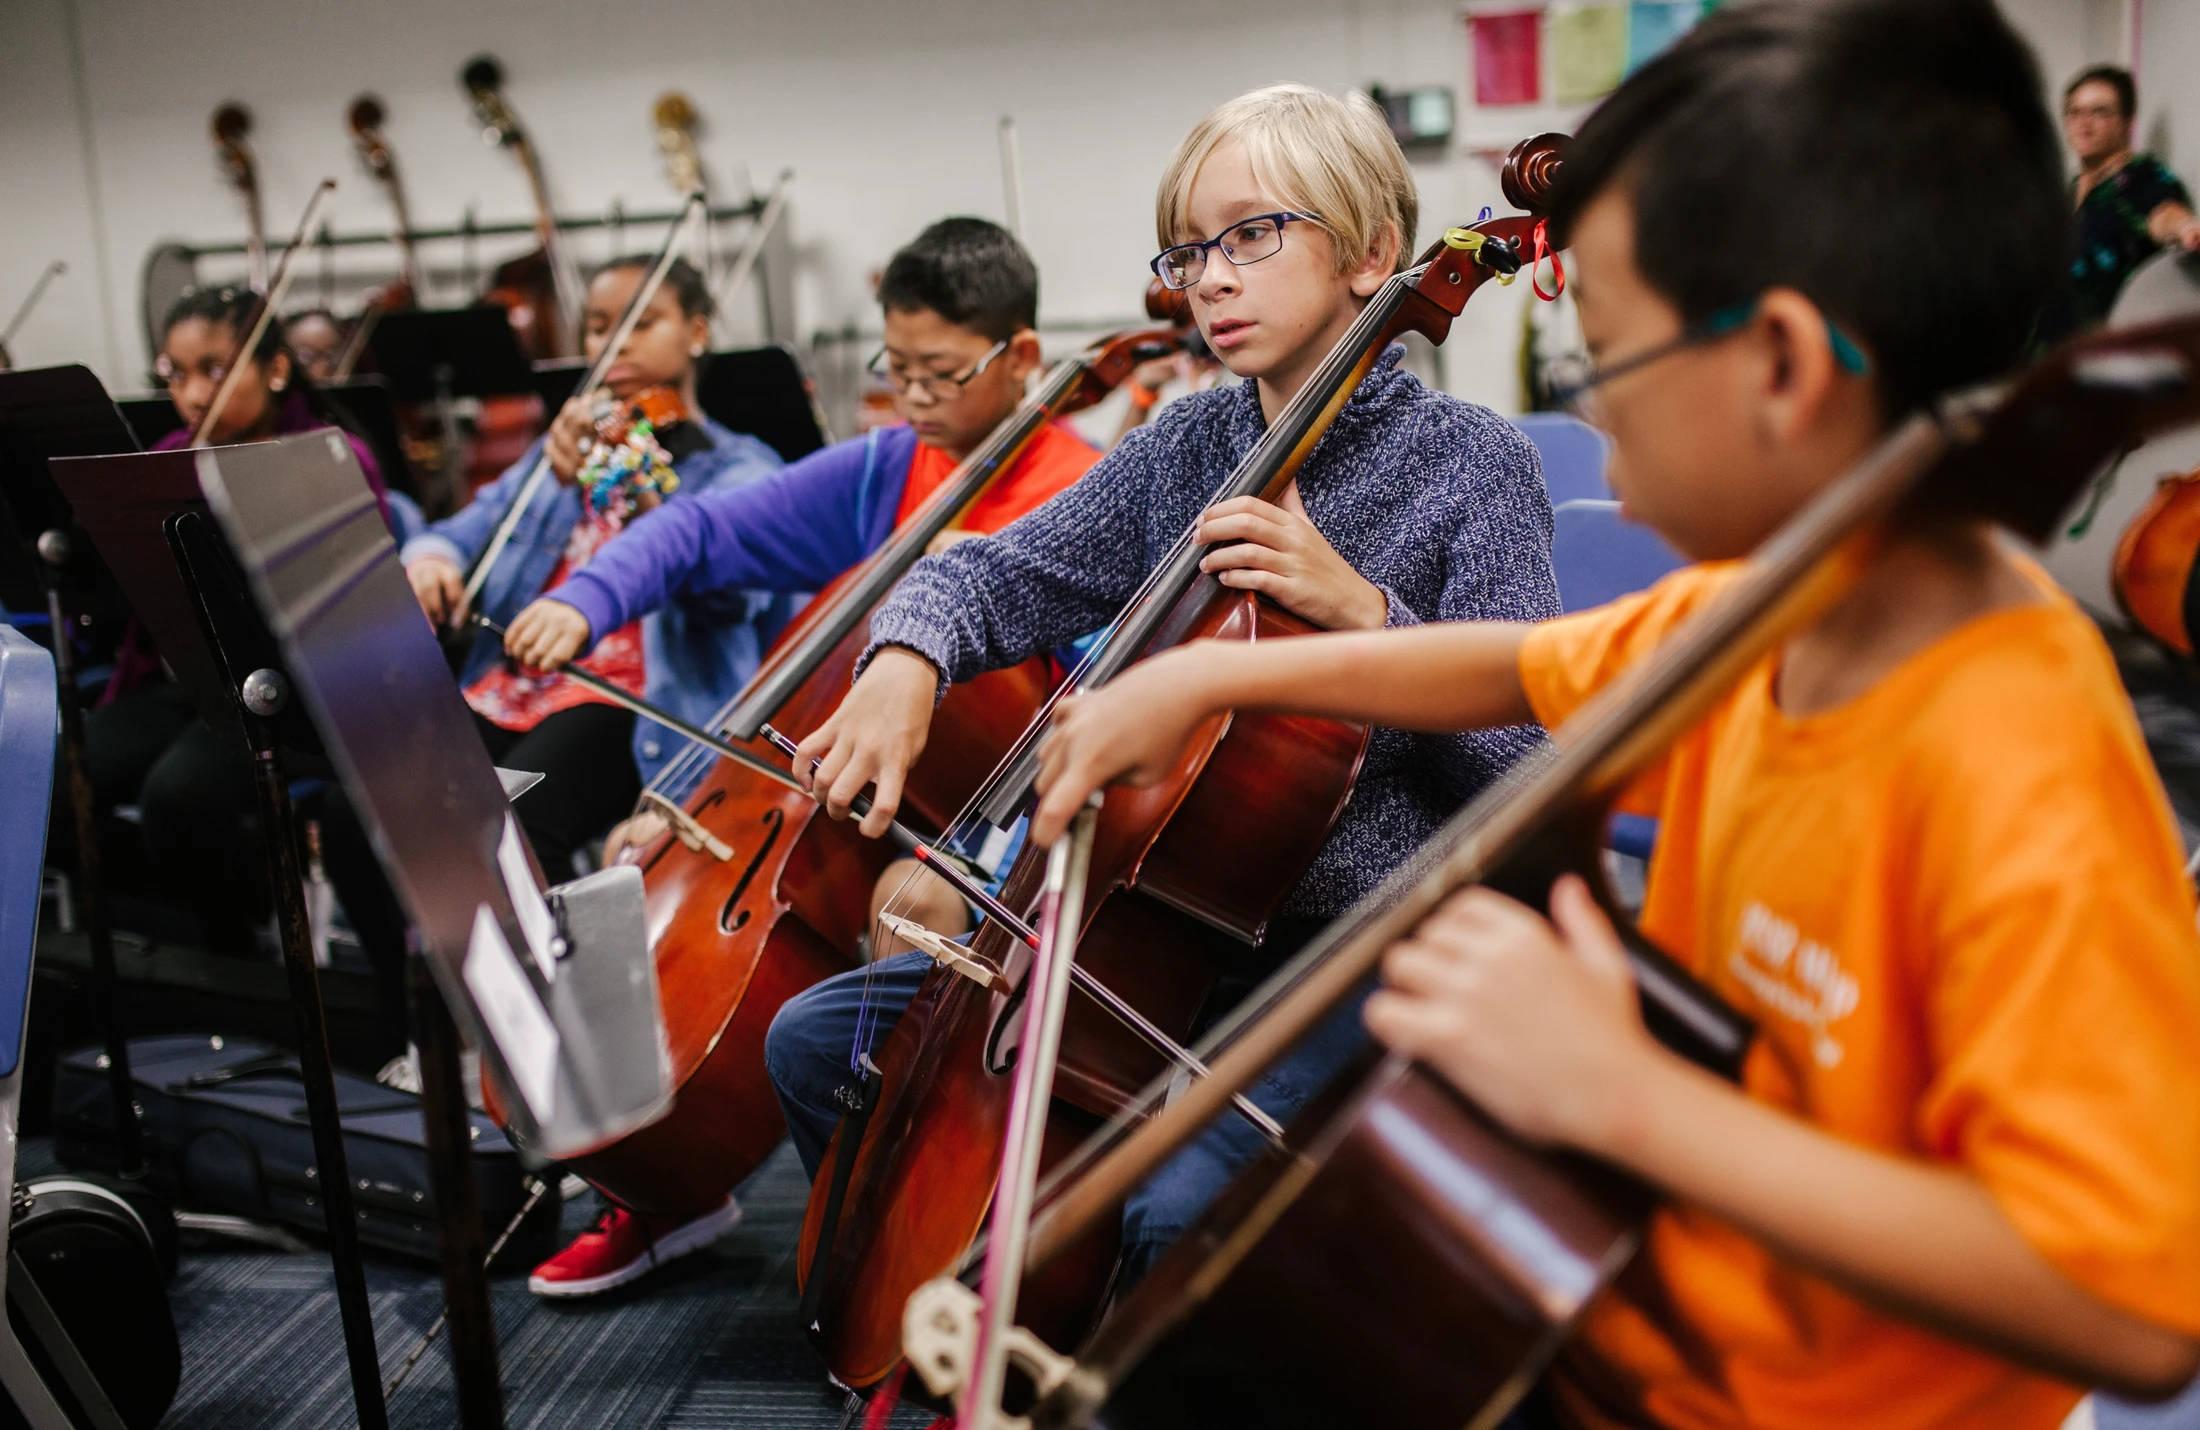 A group of children playing cello in a classroom.